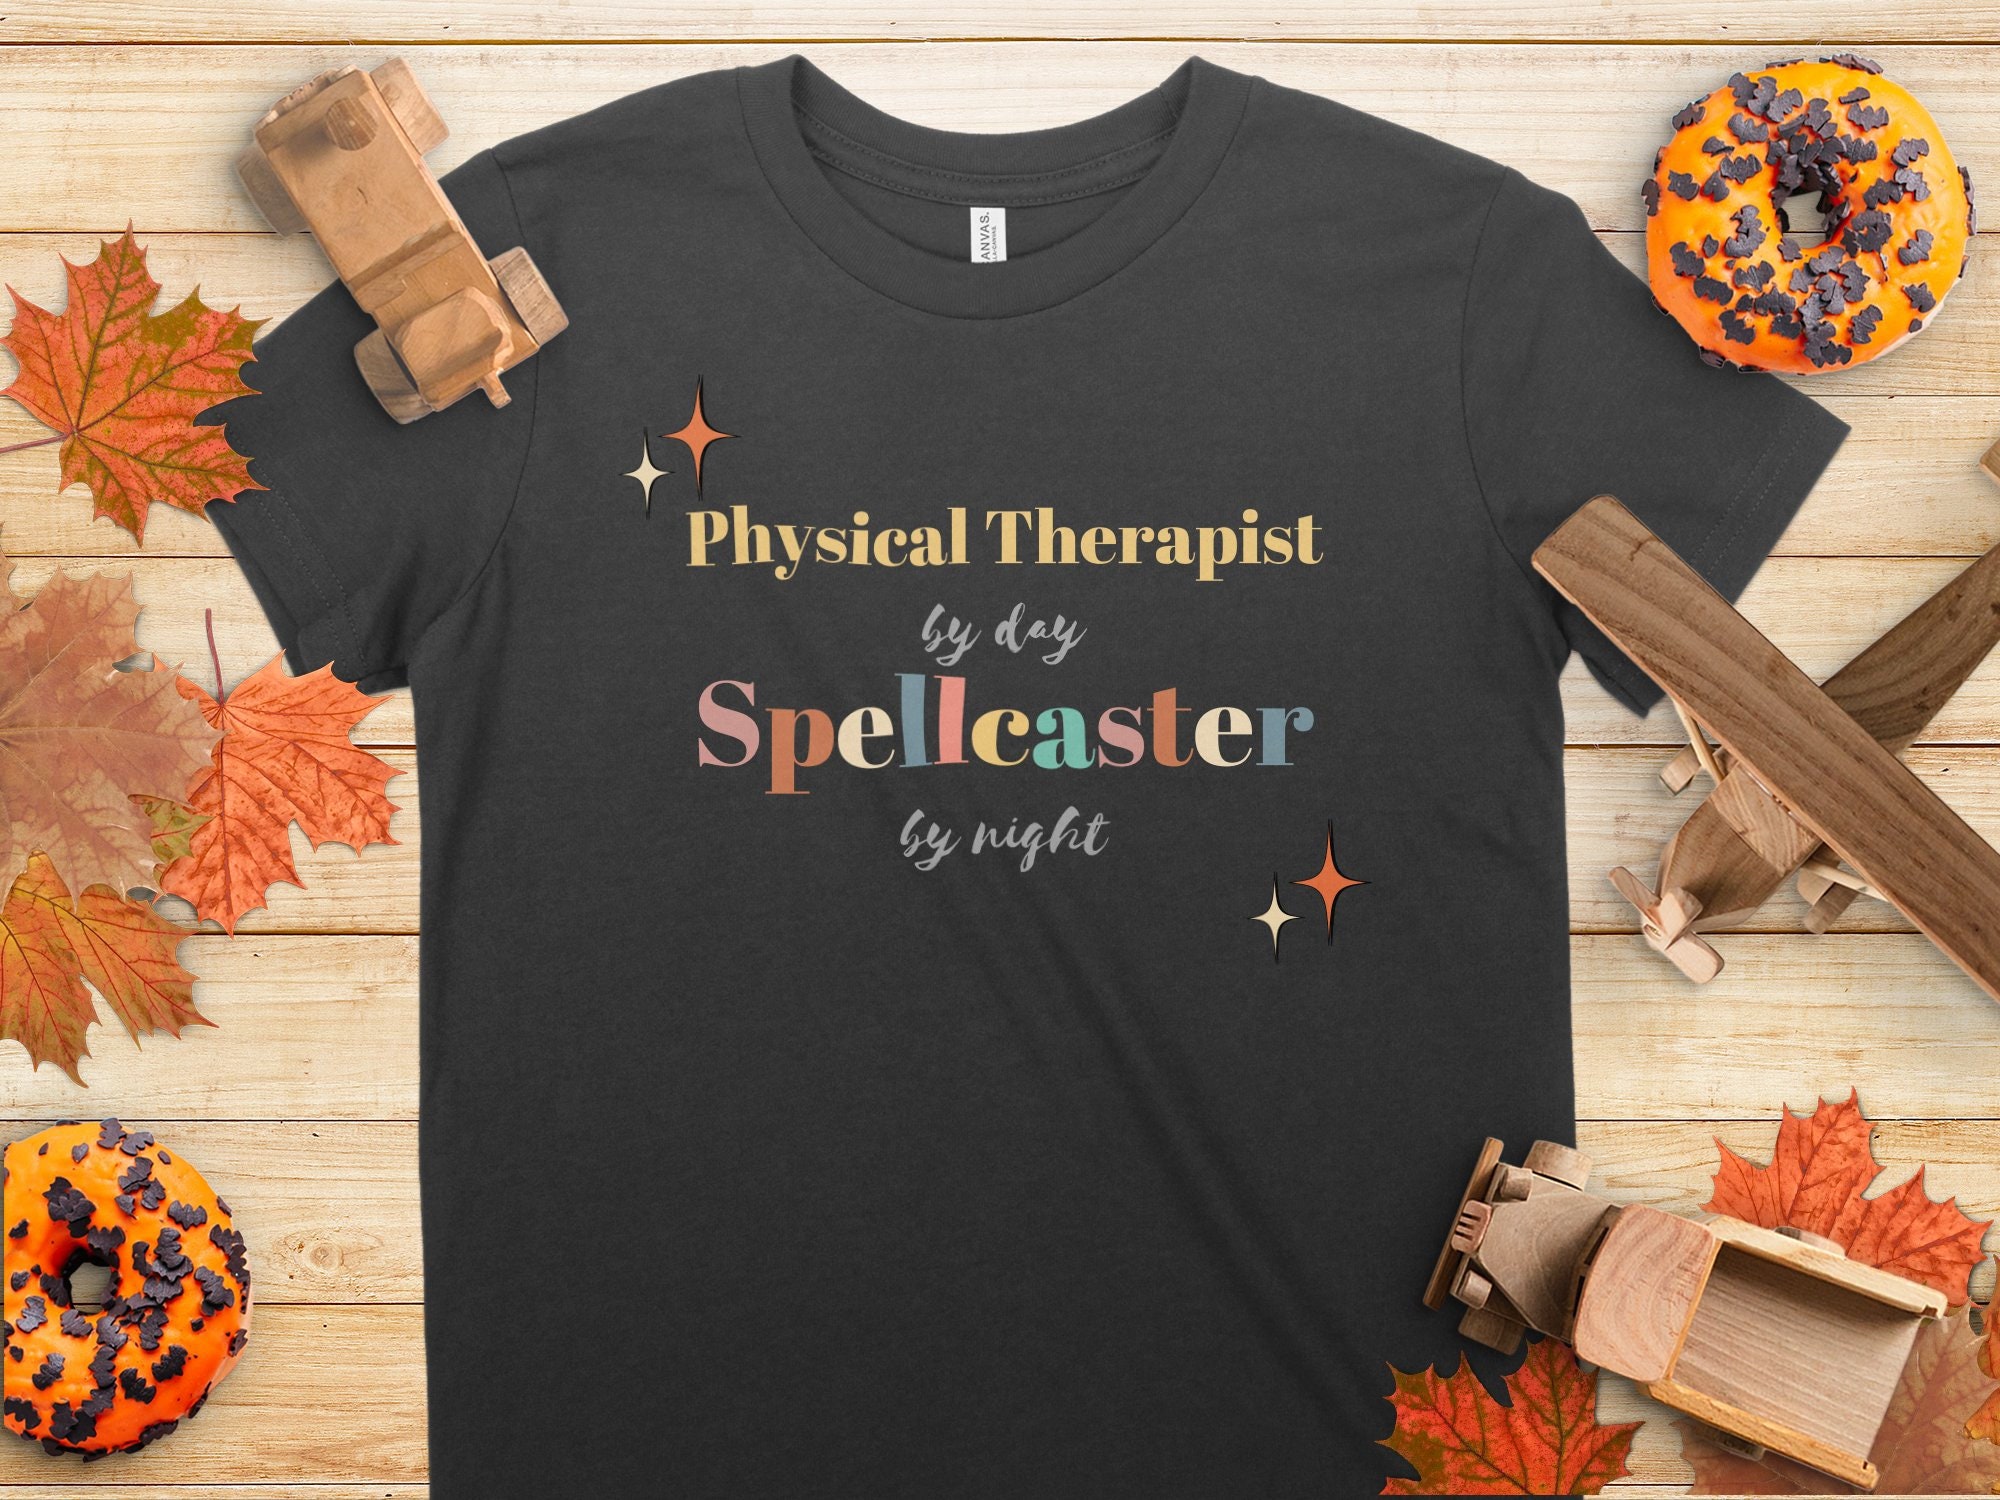 Discover Retro Halloween Physical Therapist Shirt, Team Shirts, Physical Therapist by day Spellcaster by Night, Halloween Tshirt, Gift, Customized